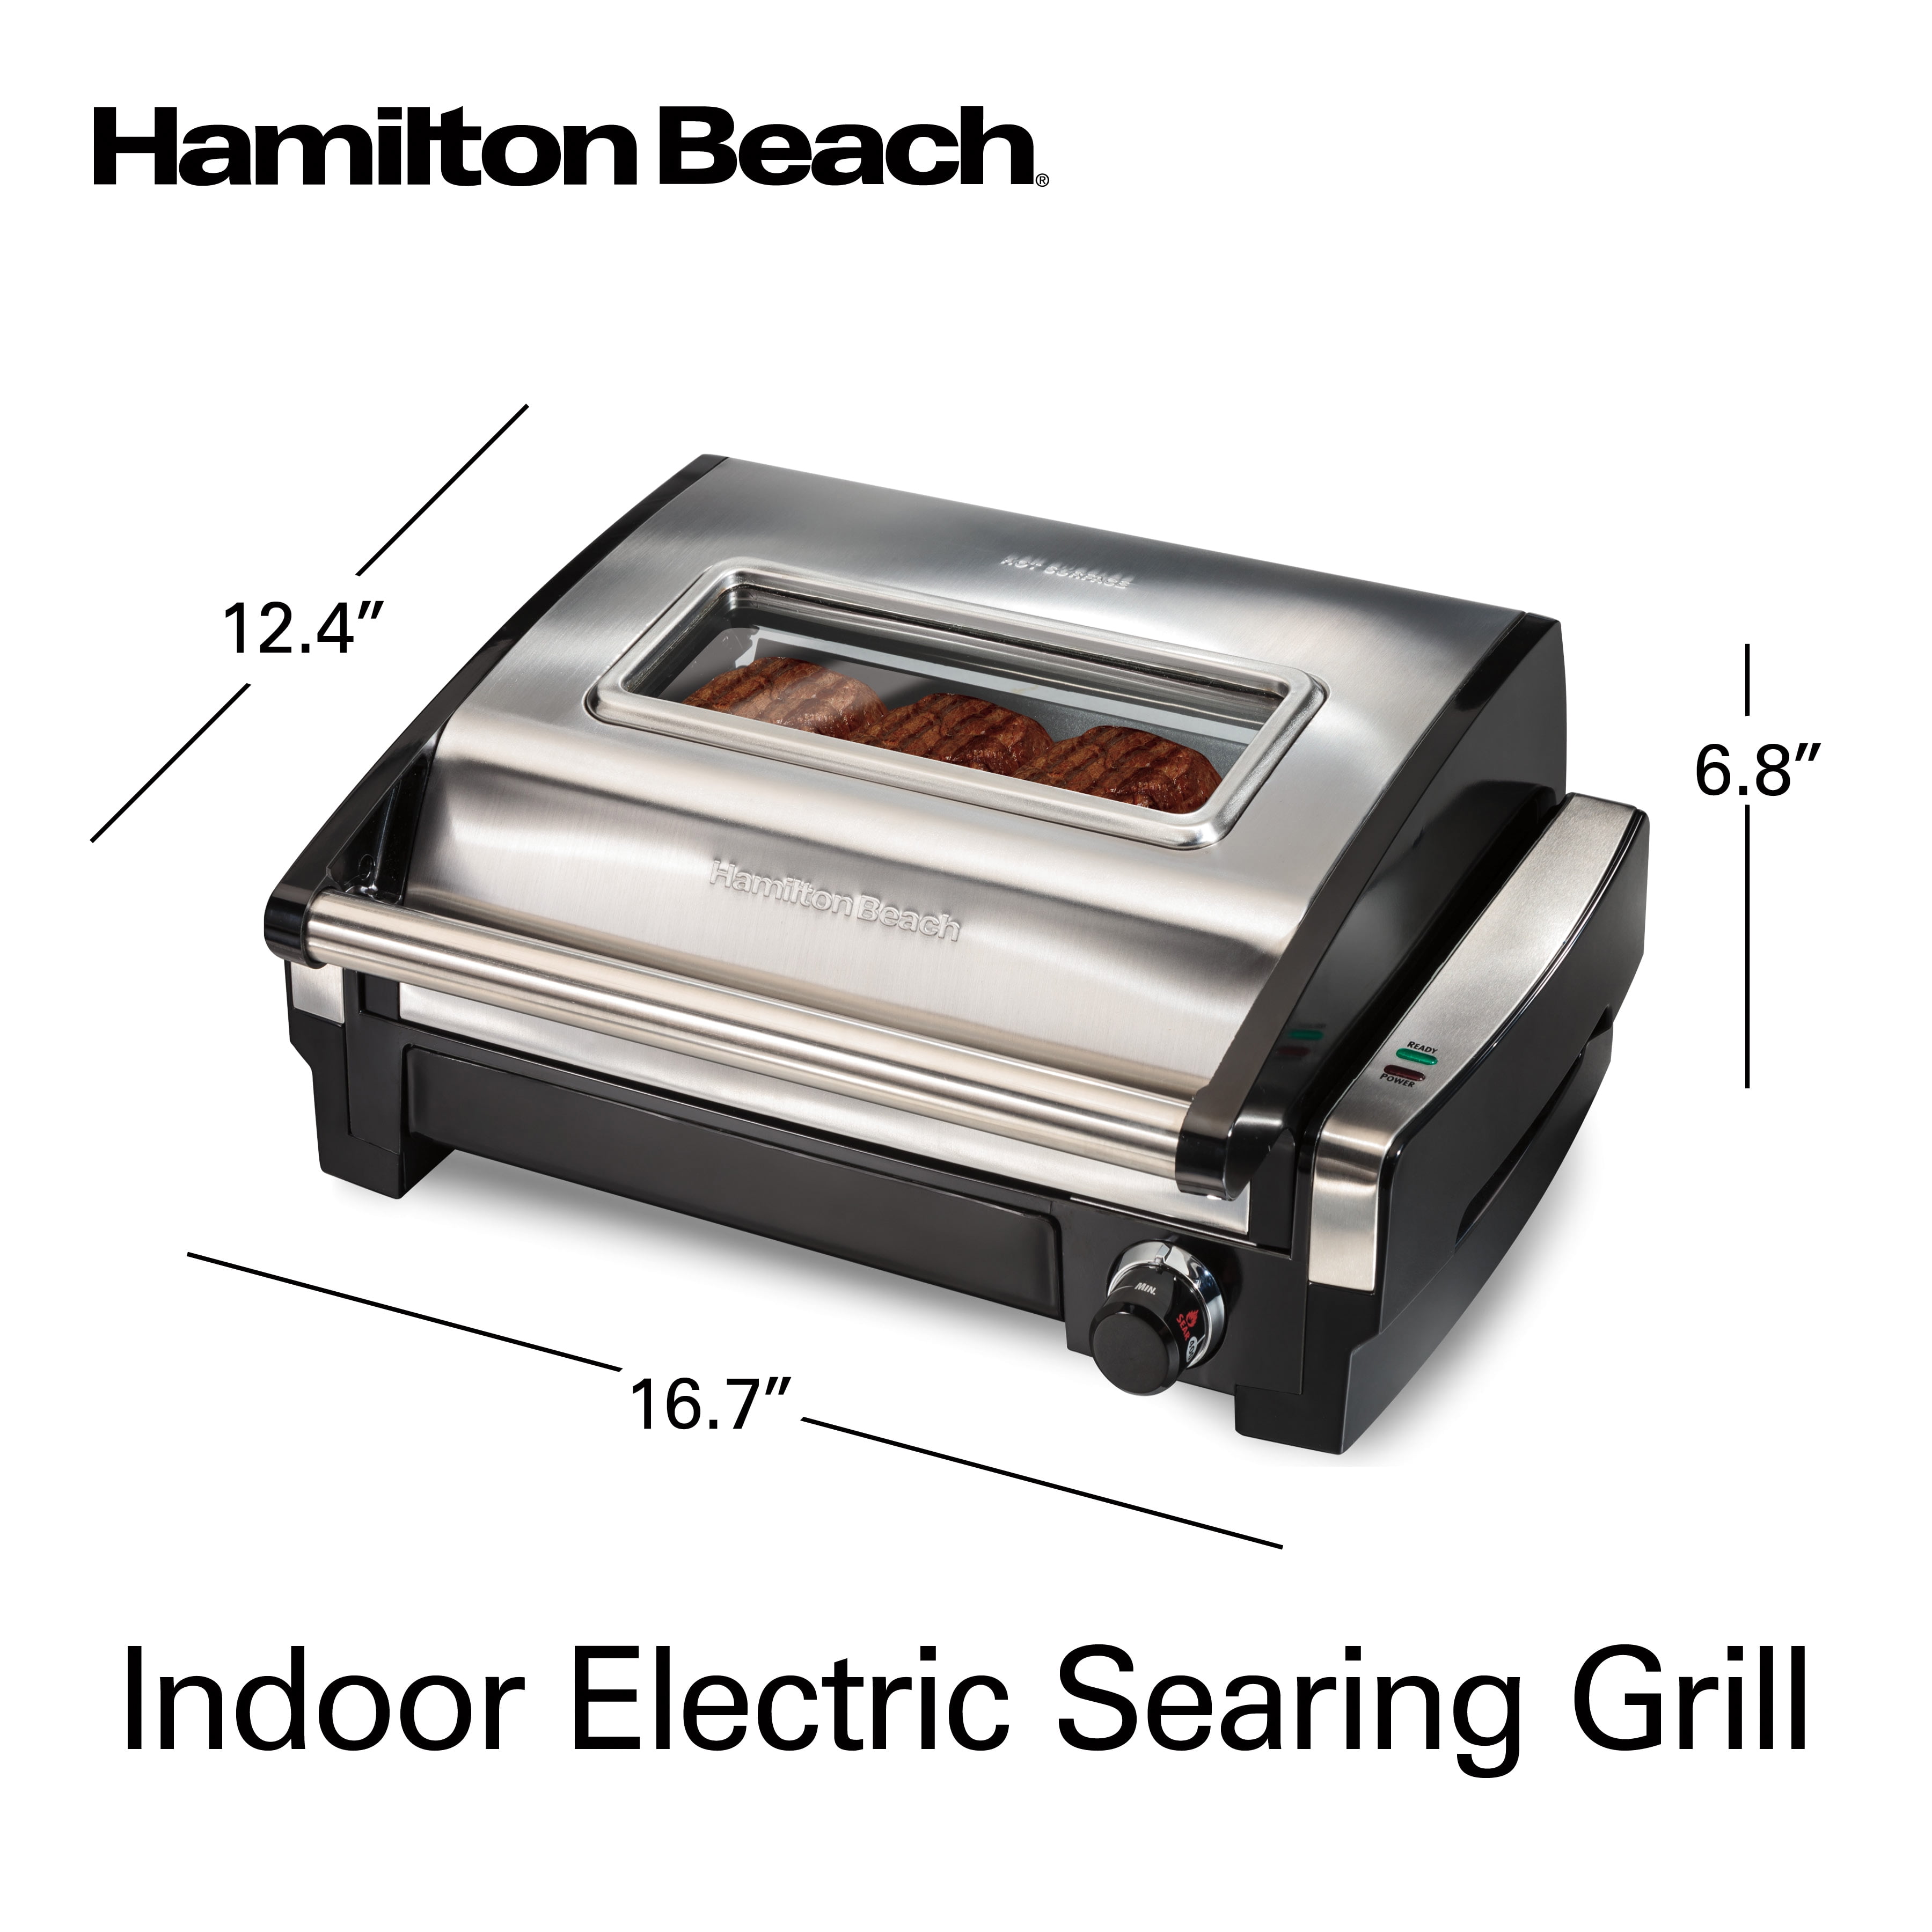 Hamilton Beach Indoor Searing Grill - Four Kids and a Chicken